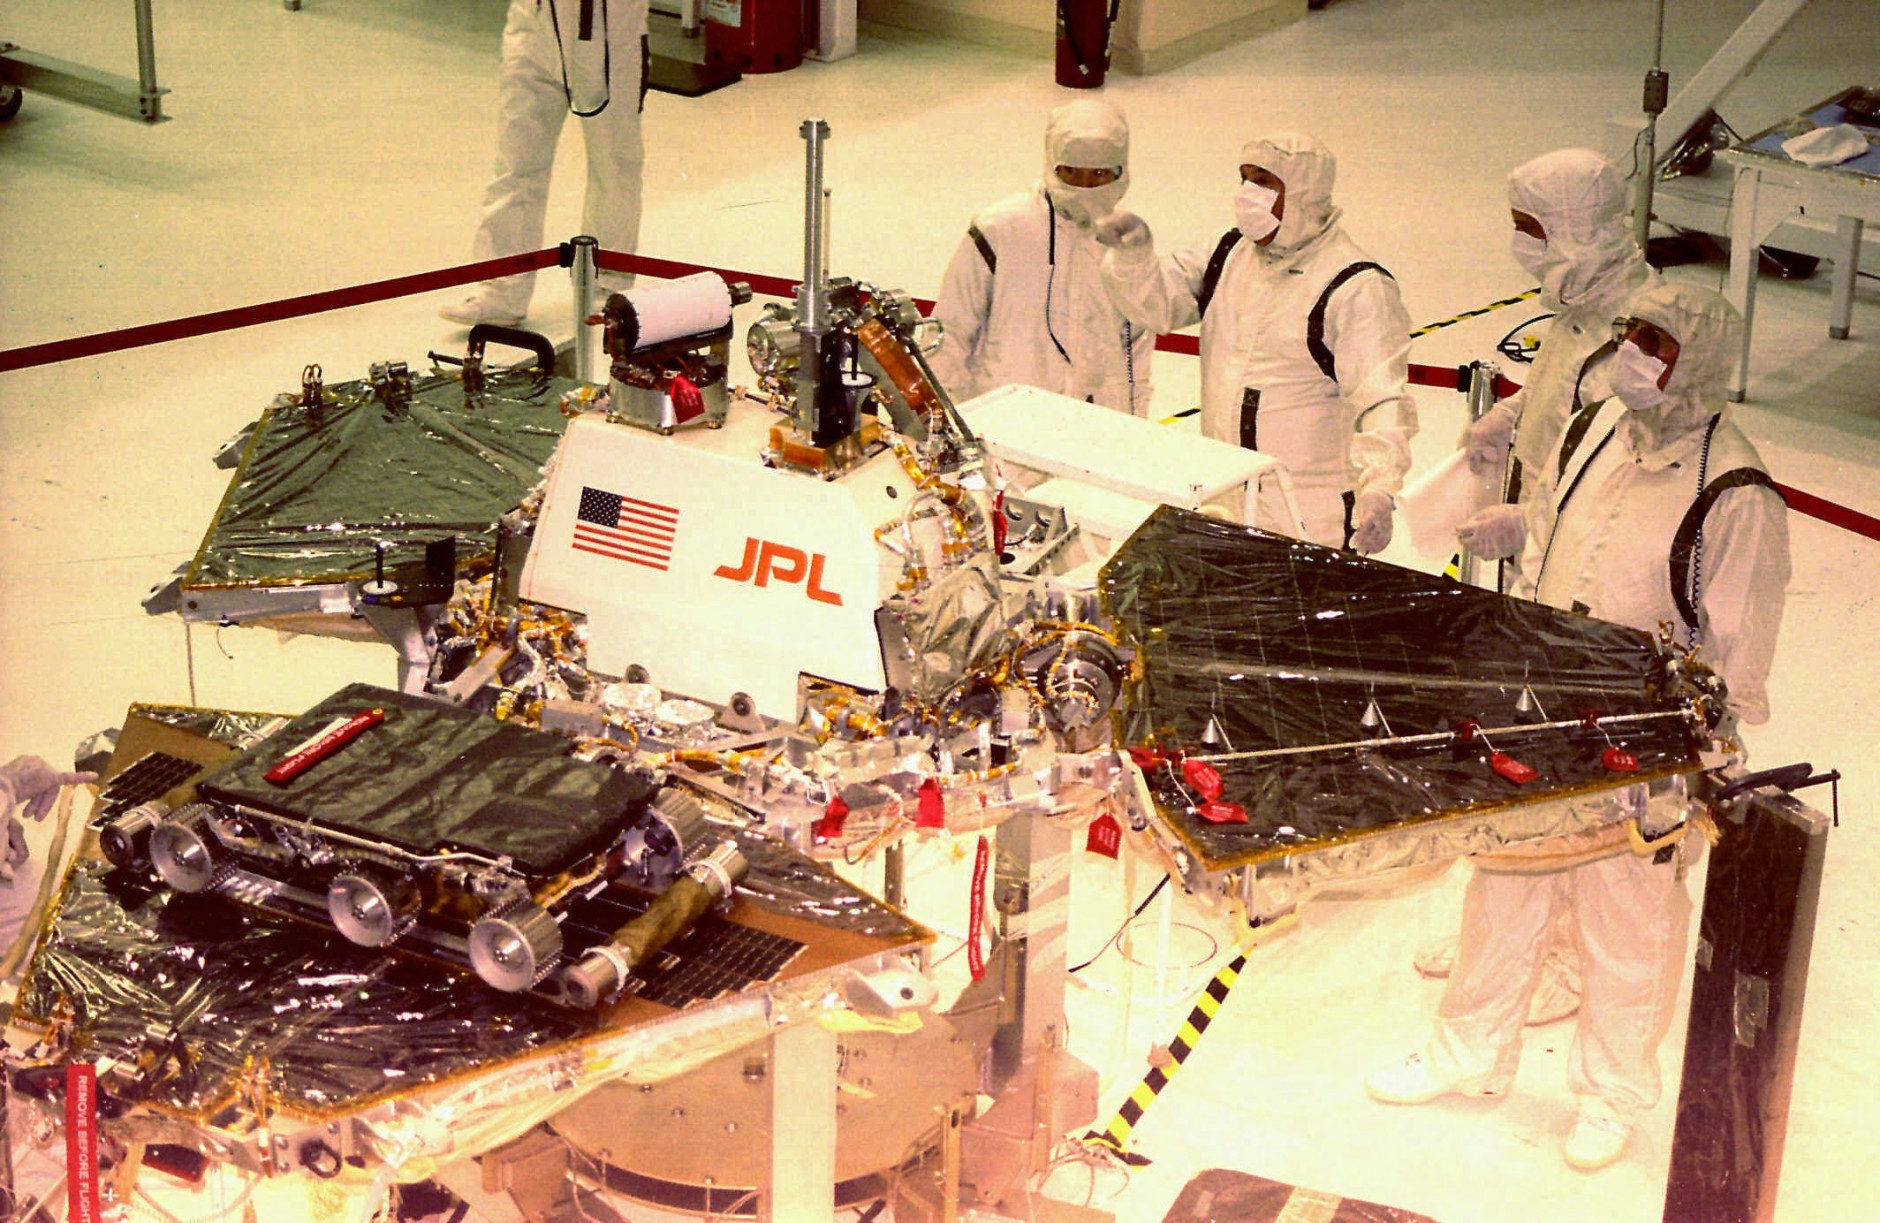 ADVANCE FOR SUNDAY, JUNE 29--FILE--Workers from NASA's Jet Propulsion Labs look over the  Mars Pathfinder Oct. 1, 1996 at Kennedy Space Center in Florida. The spacecraft will land on Mars July 4, 1997, and the rover Sojourner lower left with wheels, will explore the surface of the planet.   (AP Photo/Florida Today,Mike Brown)